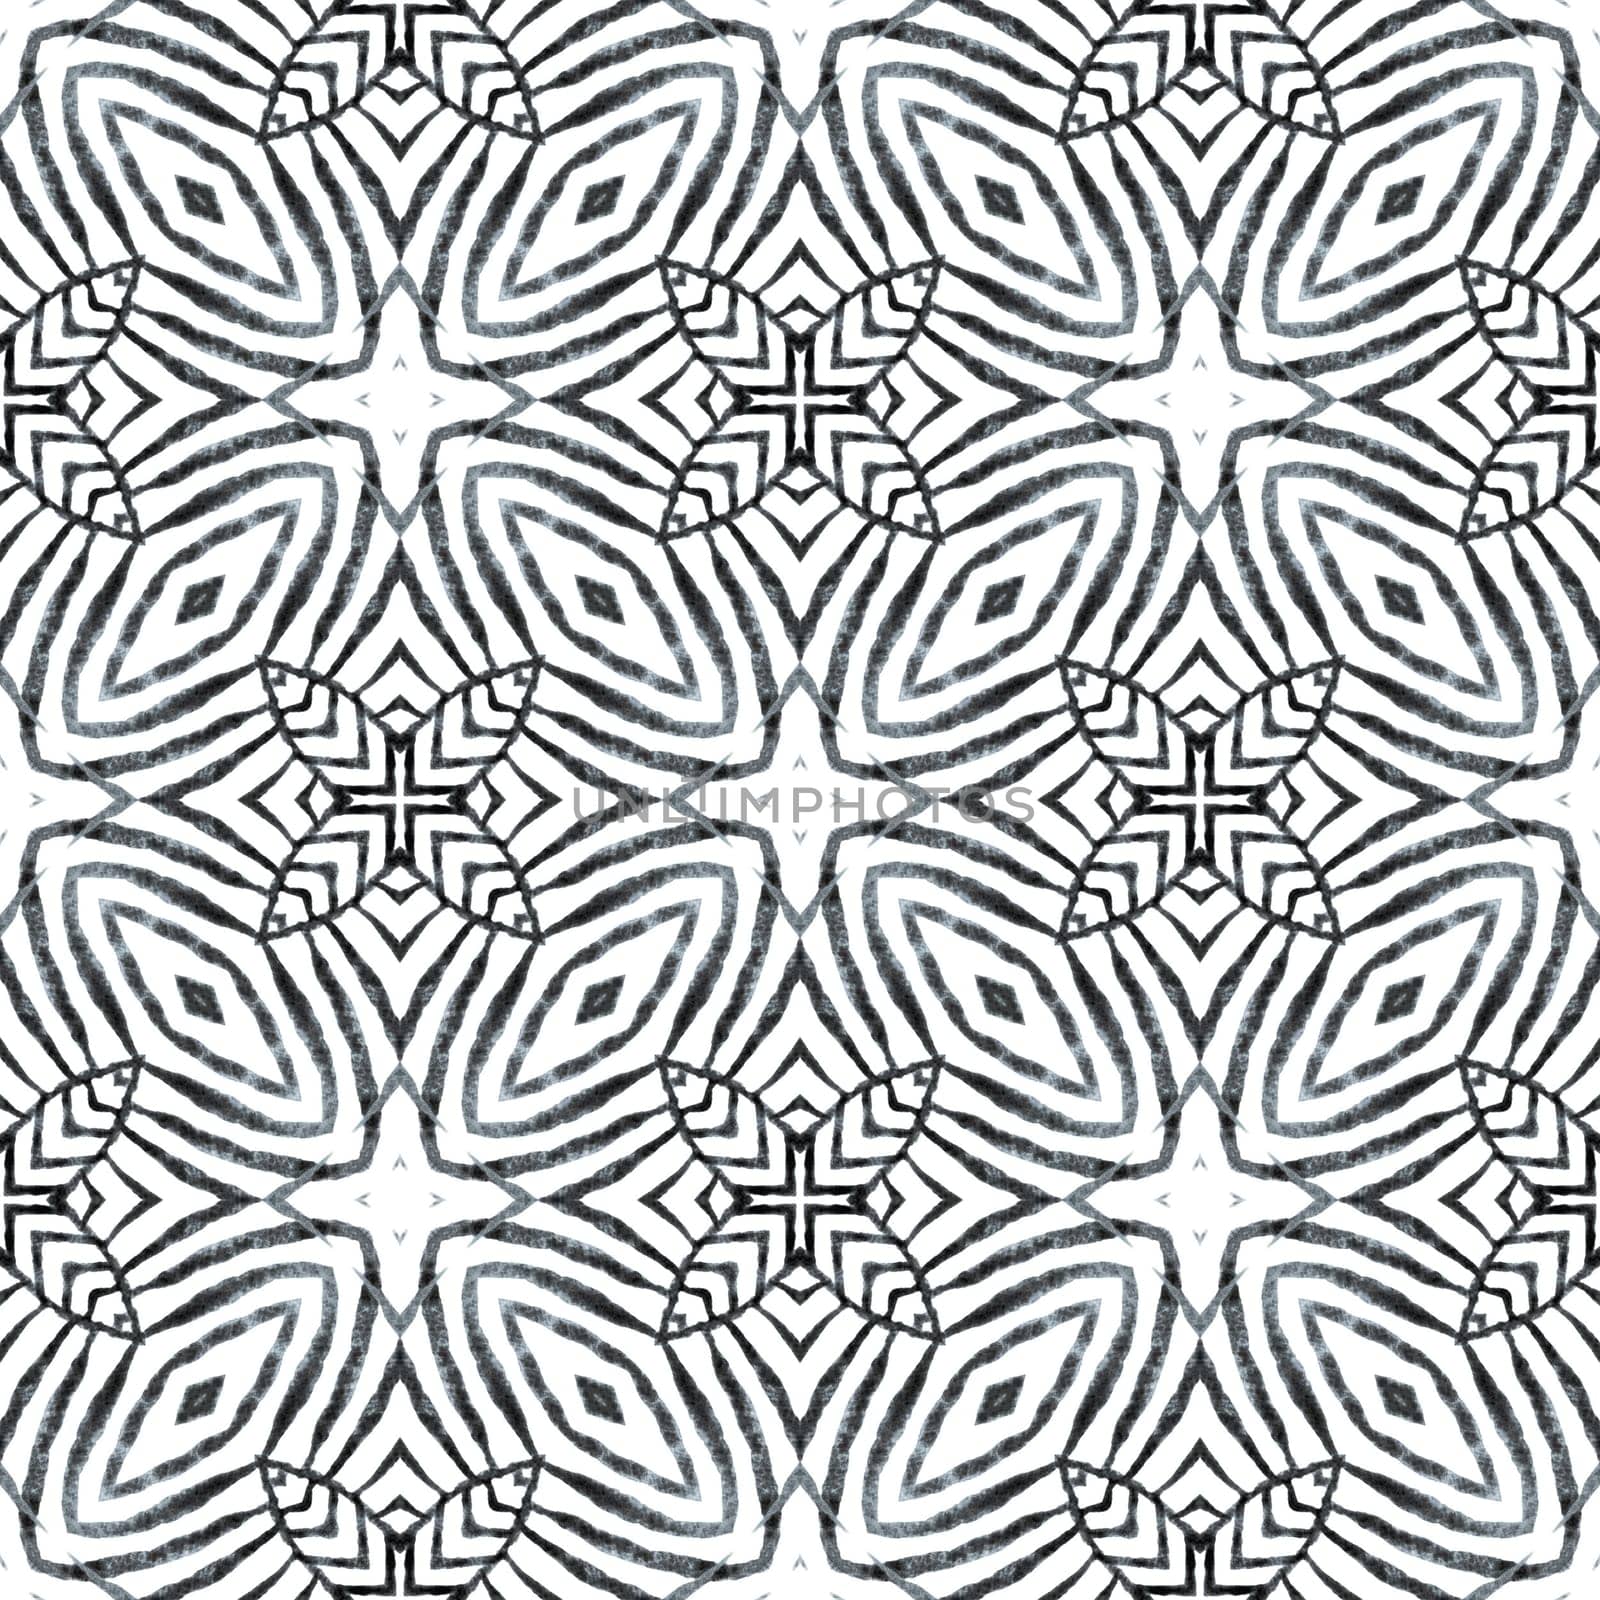 Textile ready good-looking print, swimwear fabric, wallpaper, wrapping. Black and white tempting boho chic summer design. Arabesque hand drawn design. Oriental arabesque hand drawn border.